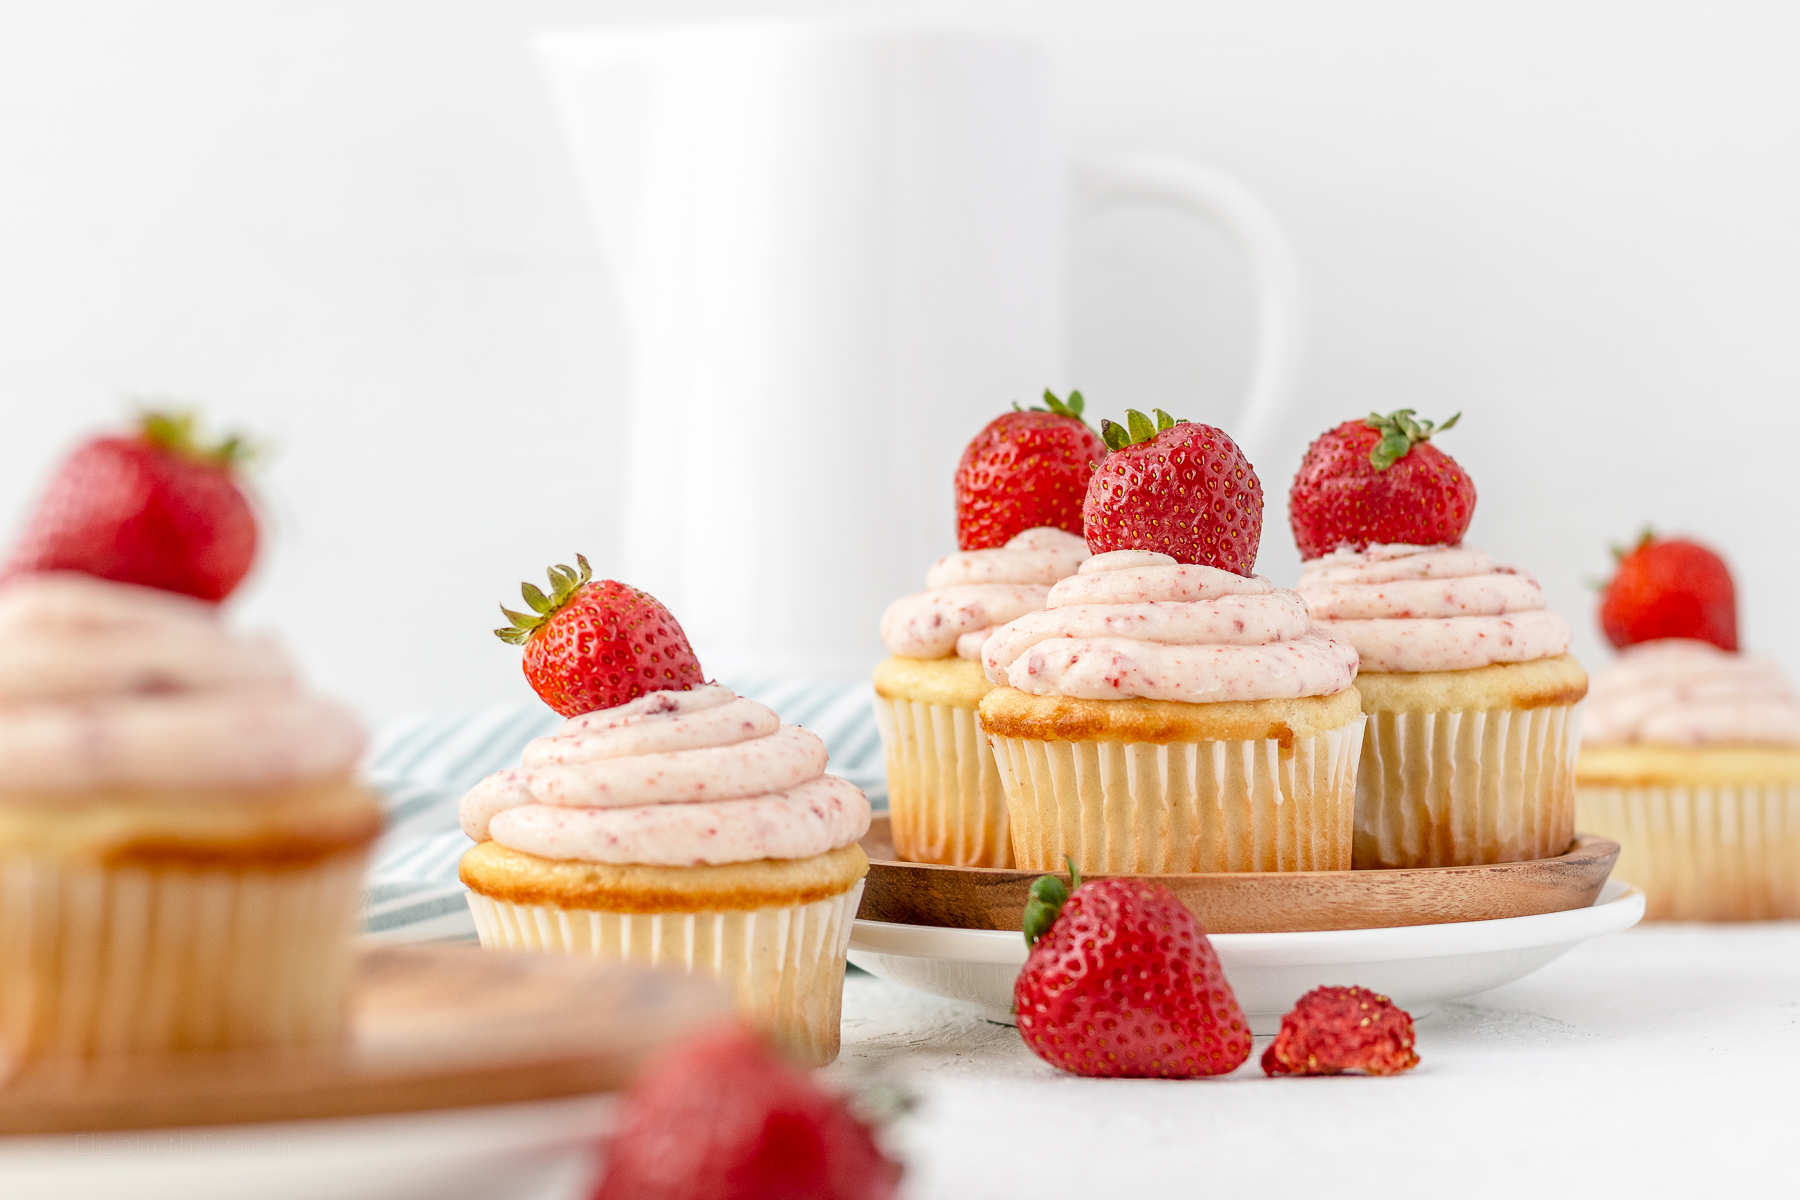 Strawberry Filled Cupcakes garnished with a fresh strawberry and set up on a table for eating.